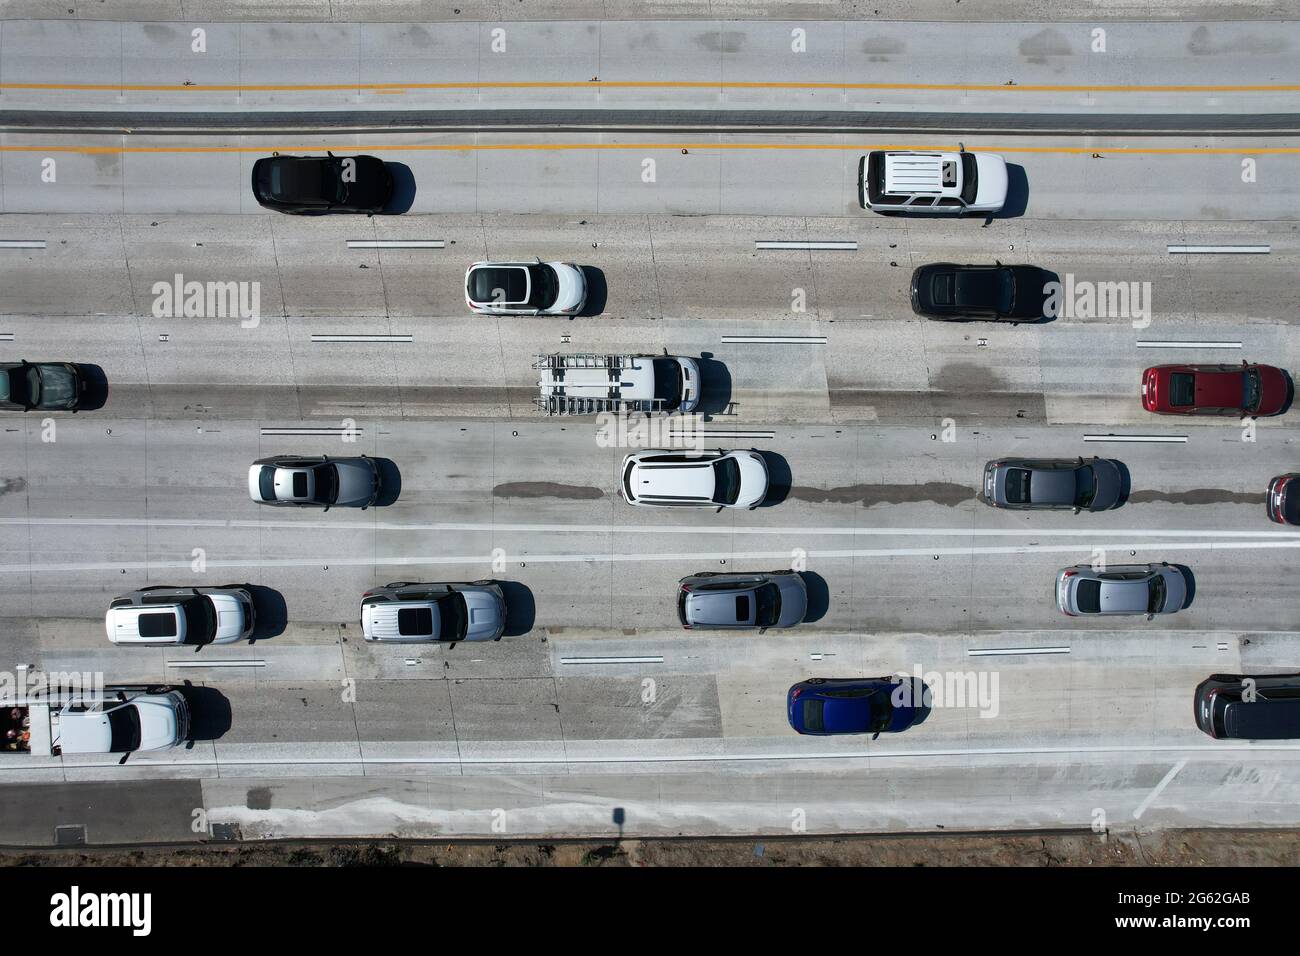 An aerial view of traffic on the California State Route 60 freeway, Thursday, July 1, 2021, in Los Angeles. Stock Photo